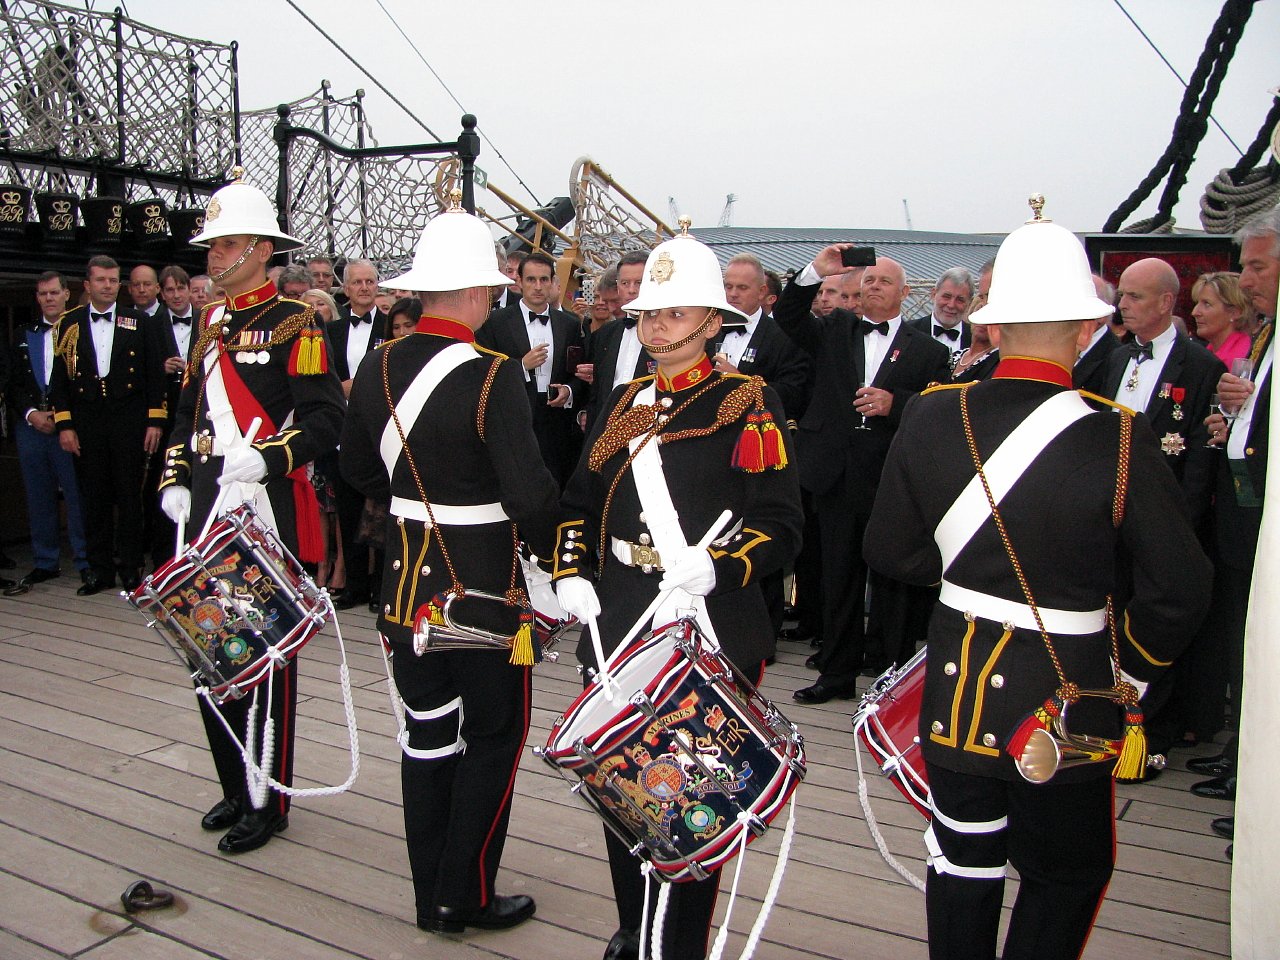 Project+Vernon+charity+dinner+on+board+HMS+Victory+11+Sep+2014+(36).jpg